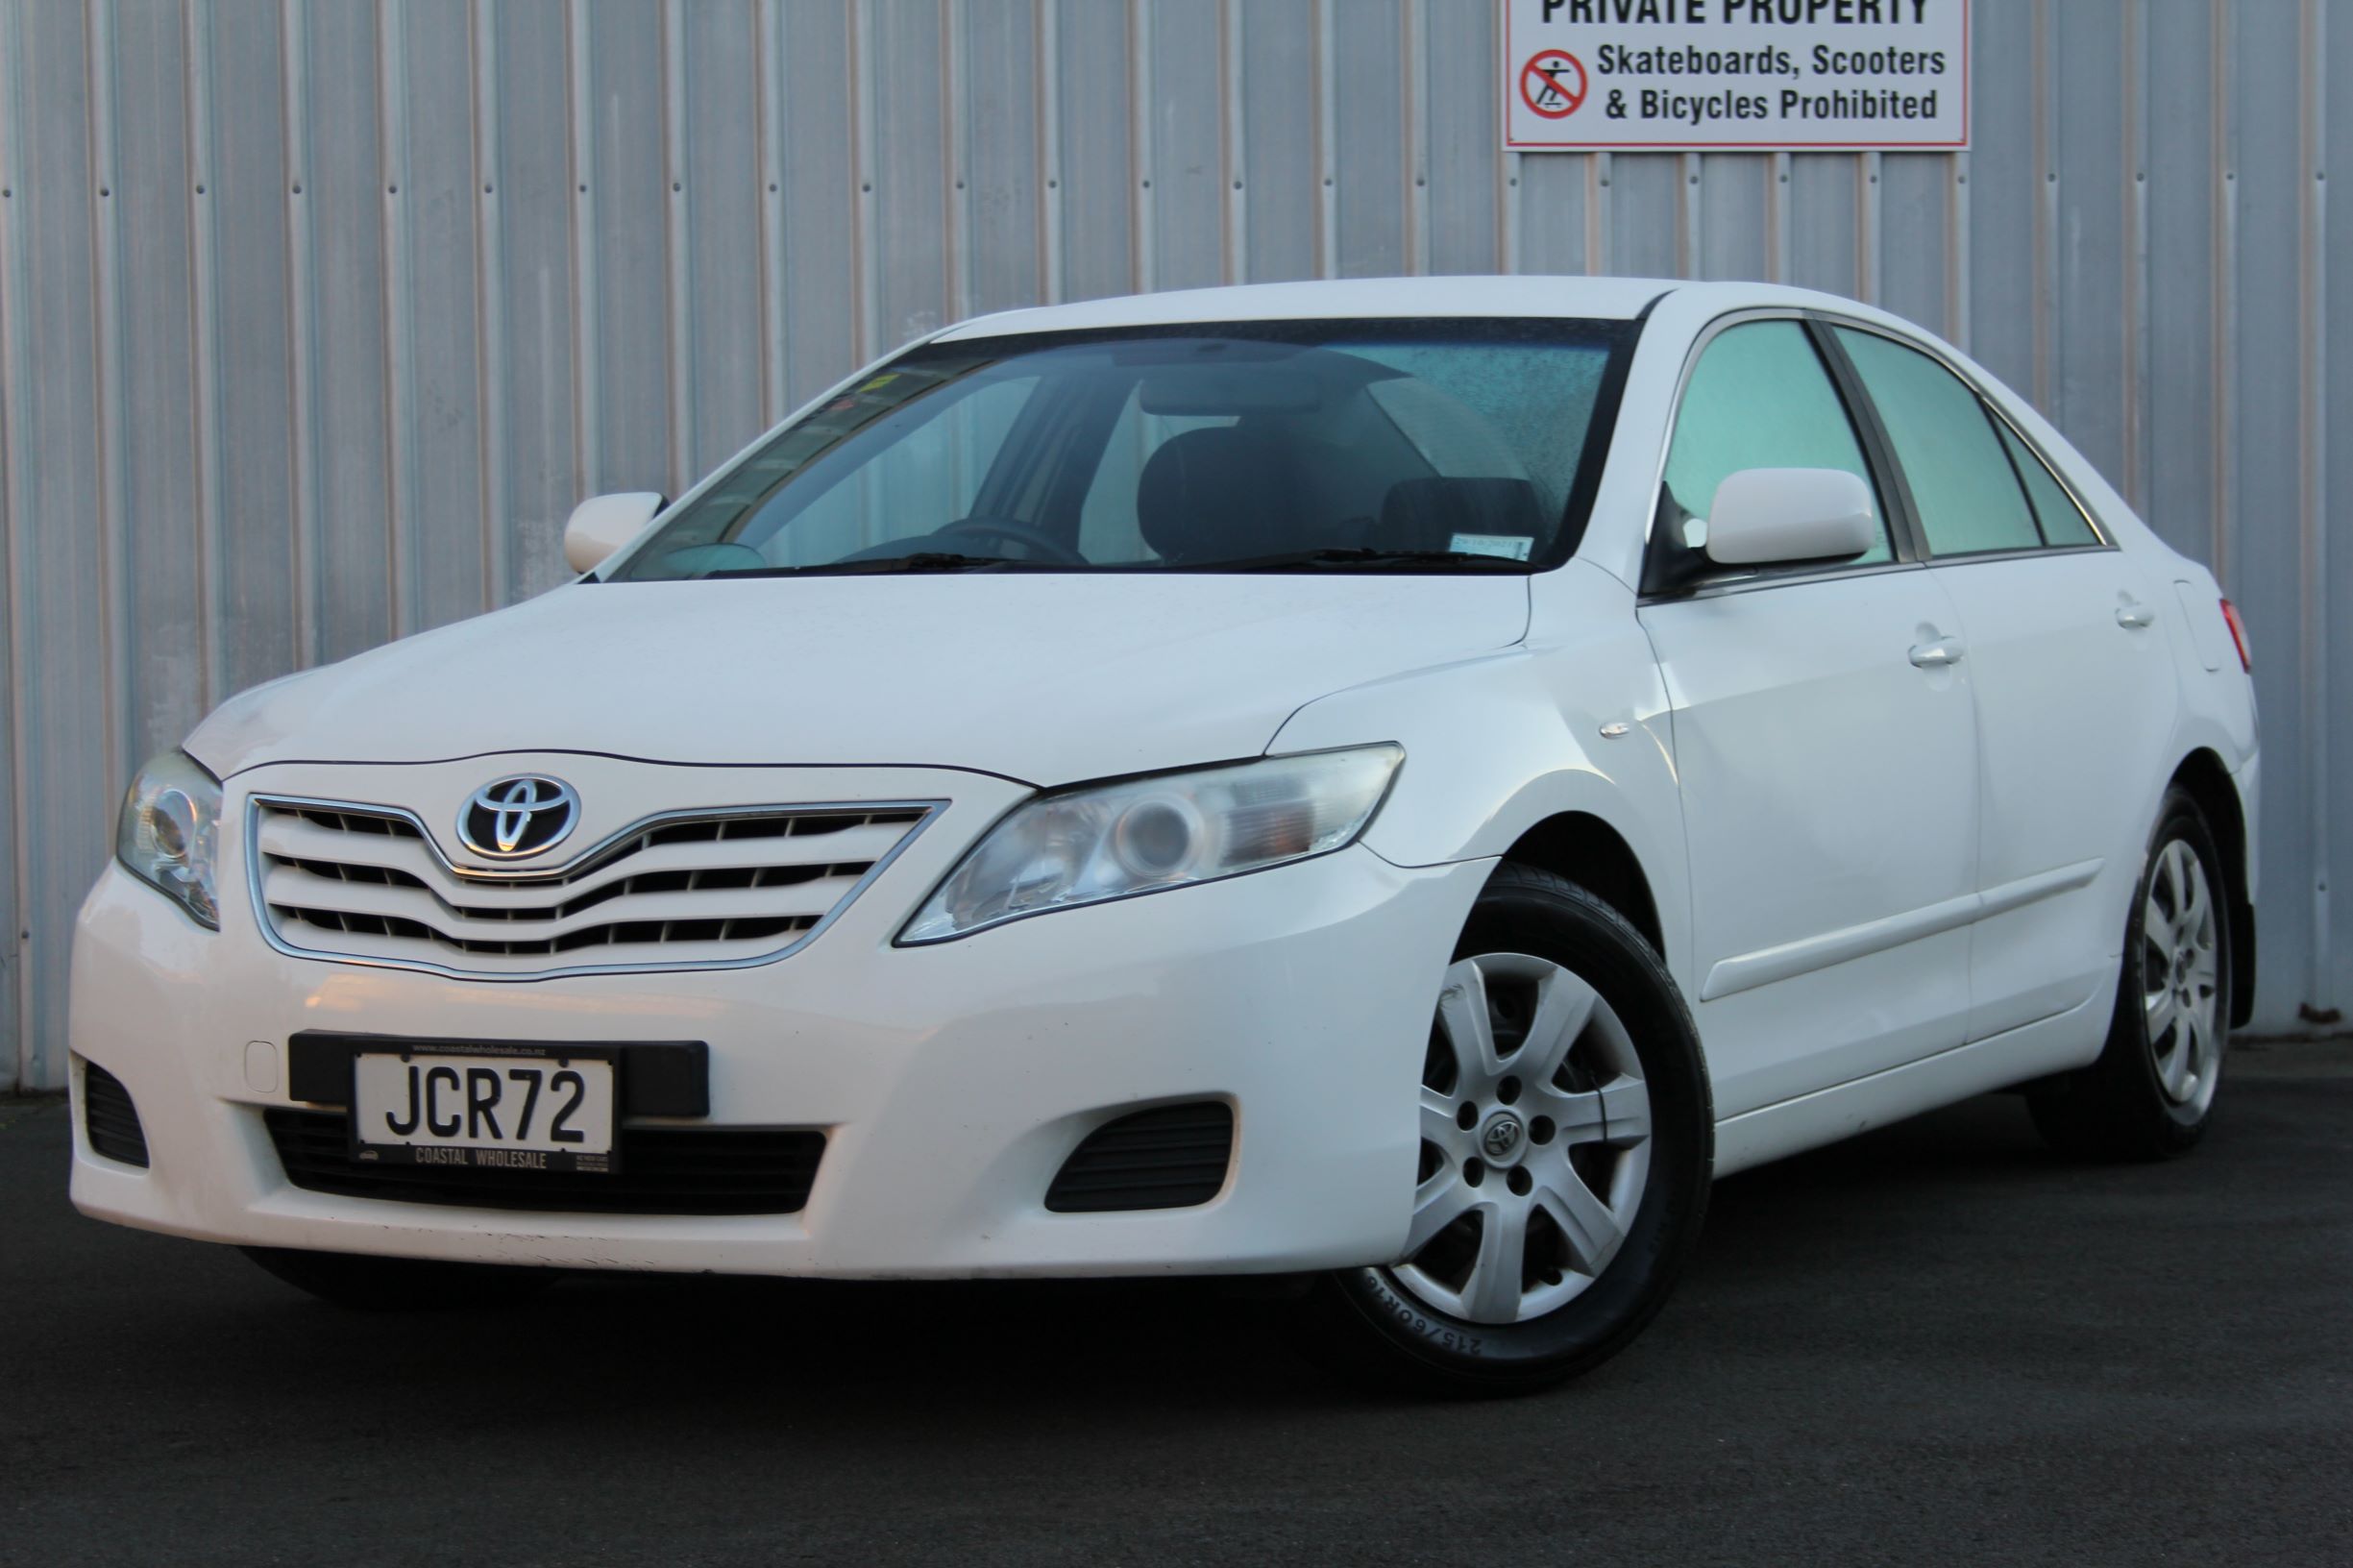 Toyota Camry 2011 for sale in Auckland